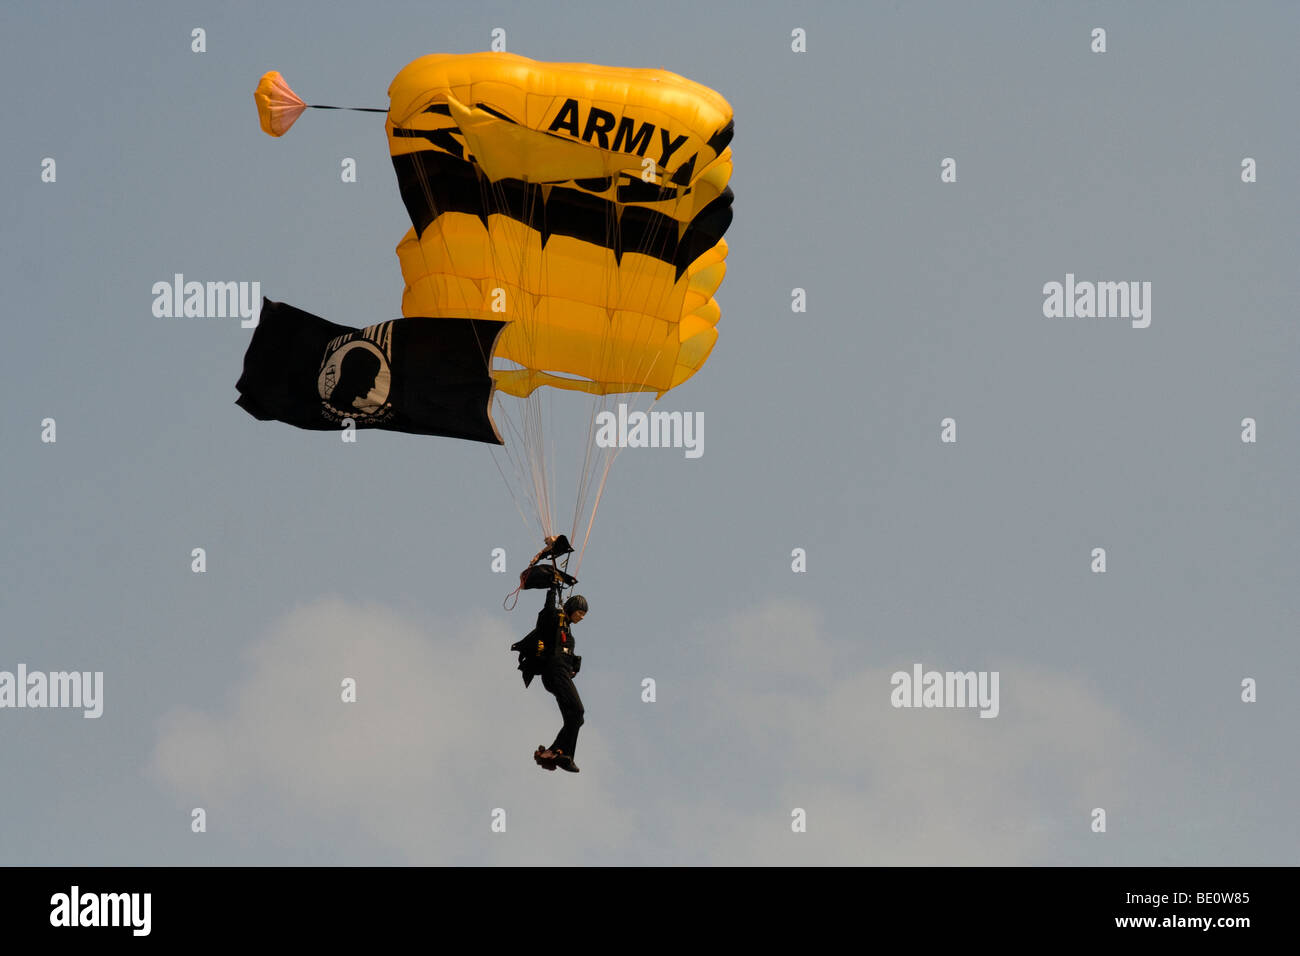 US Army Parachute Team. Chicago Air & Water Show 2009 Stock Photo